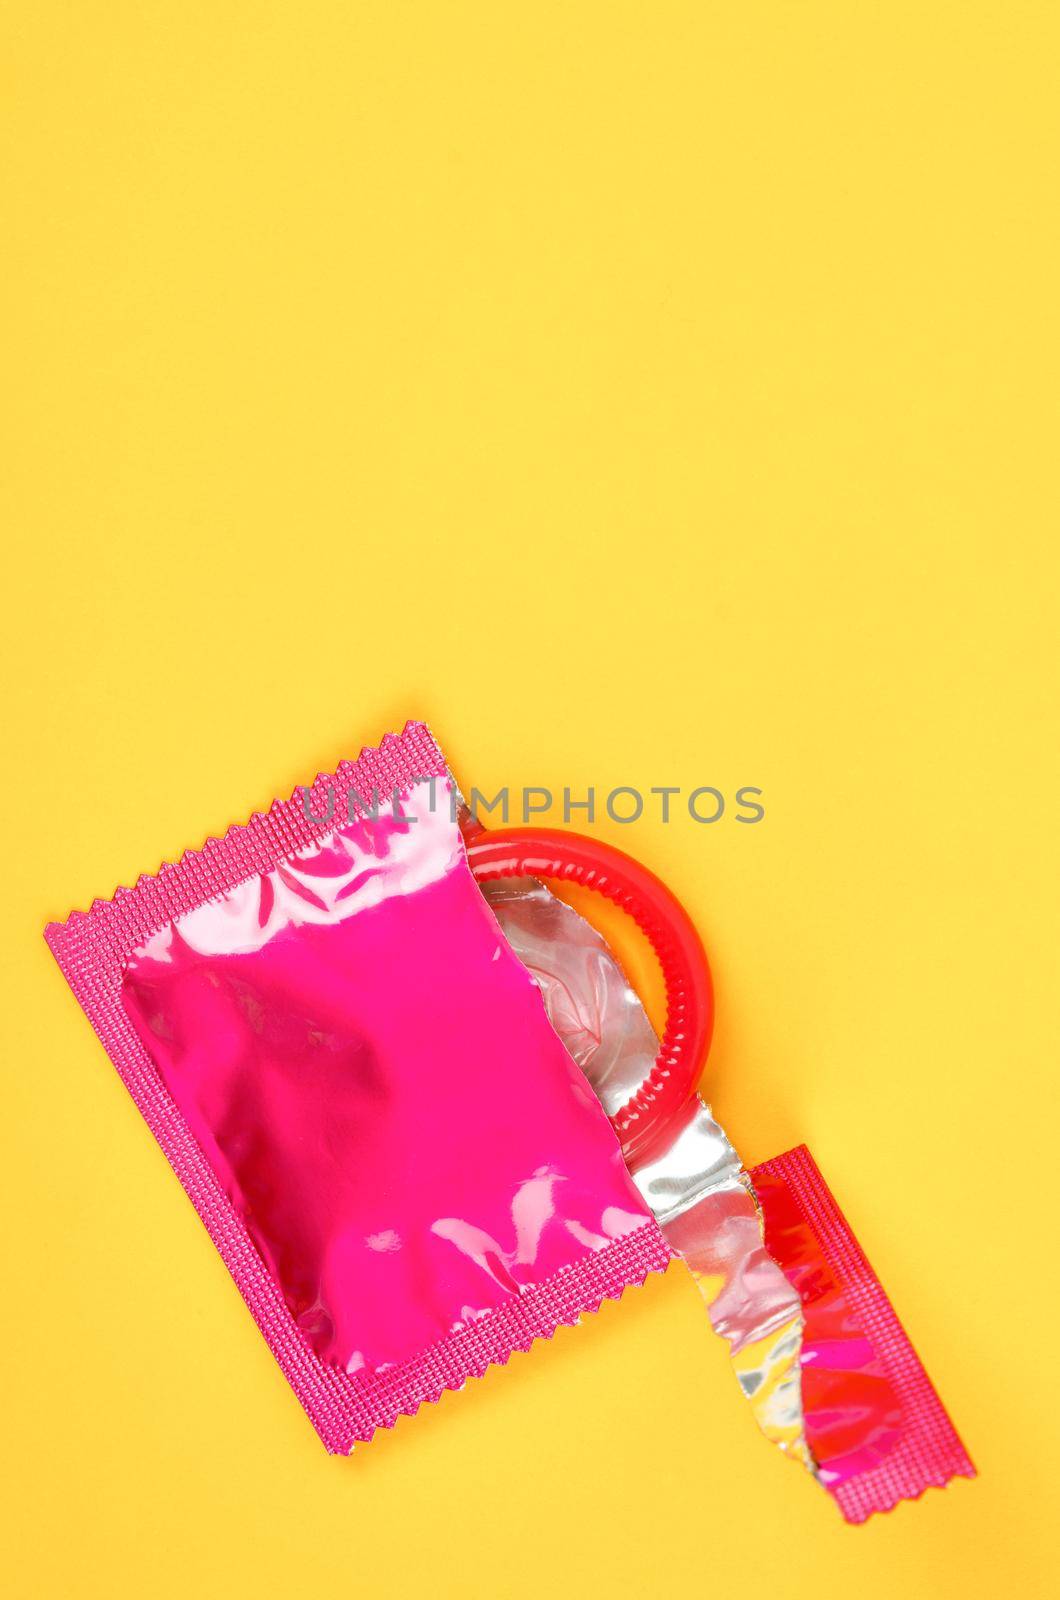 Pink opened condom and condom in pack on a yellow background. by Gamjai